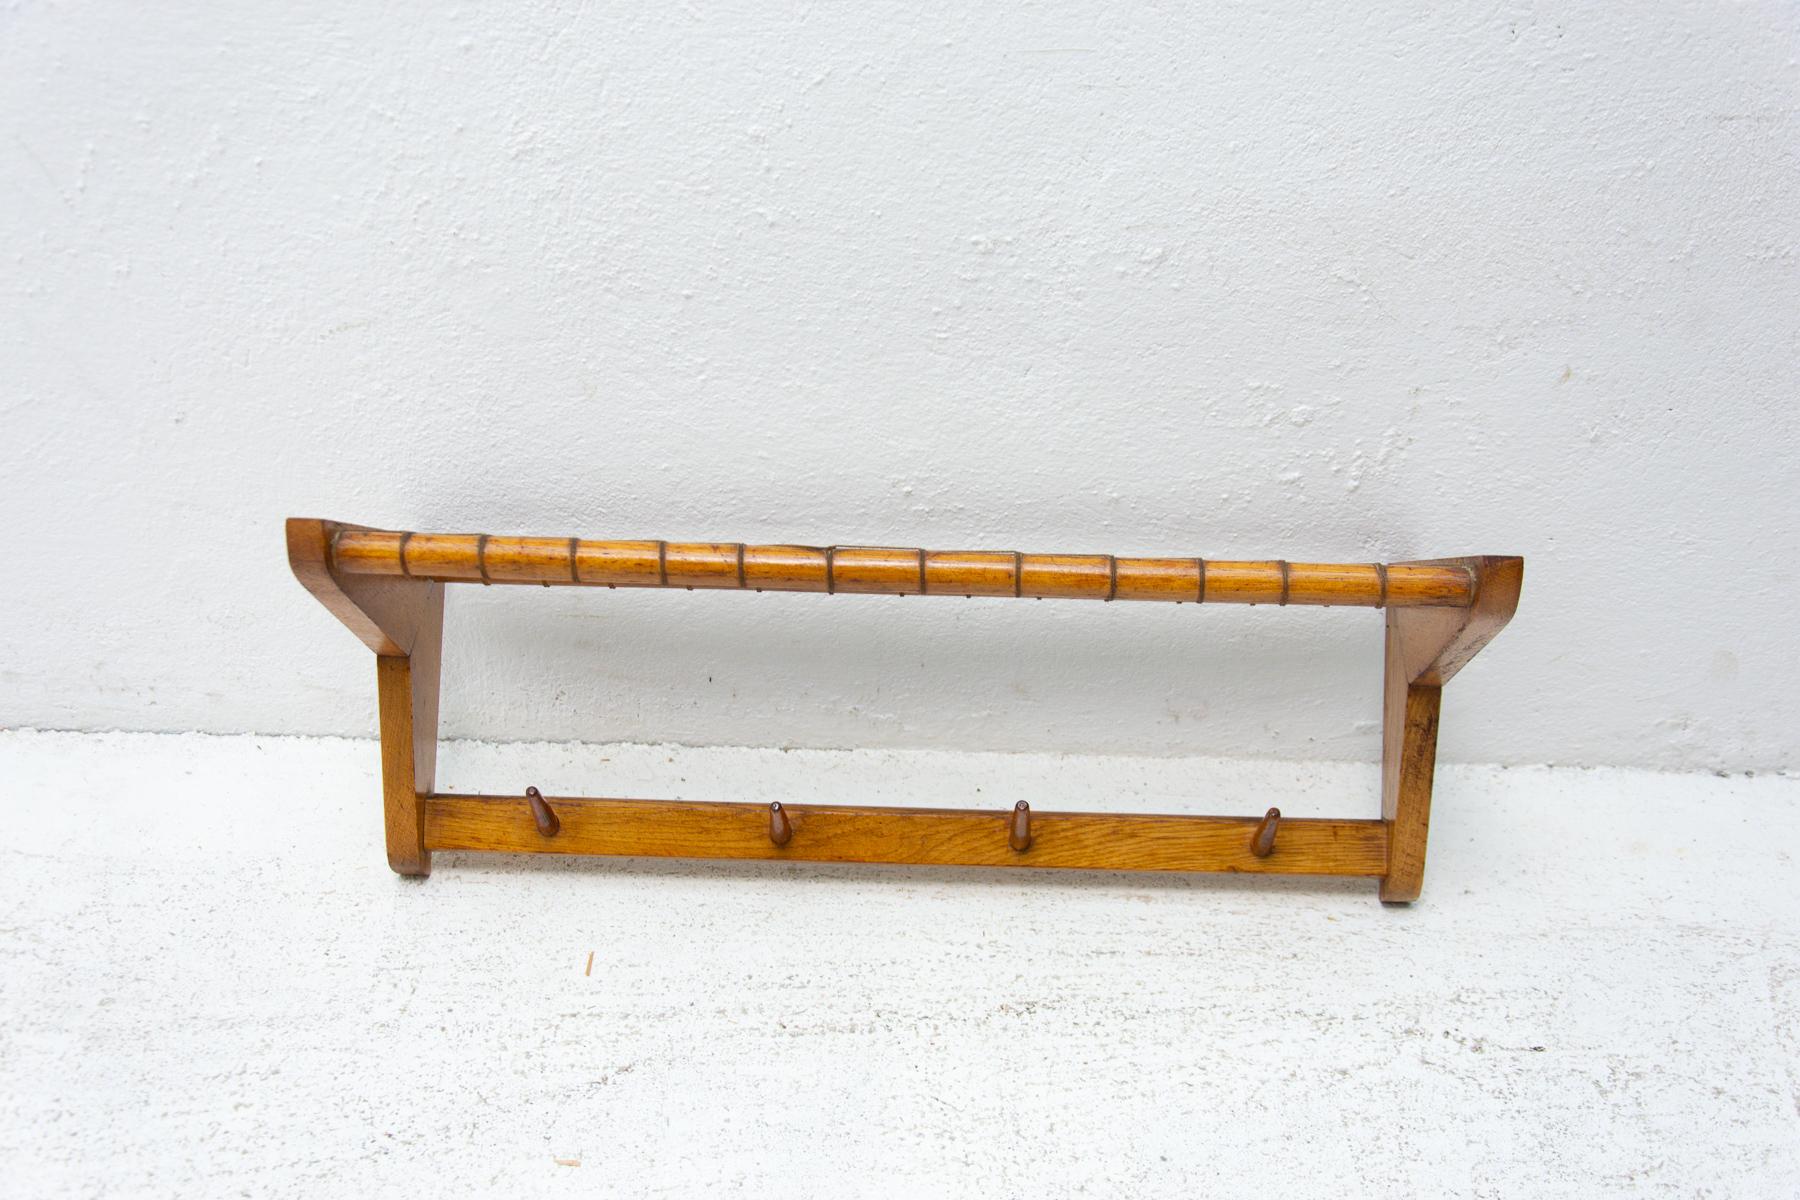 Vintage wall shelf, made in the former Czechoslovakia in the 1960´s. It was produced by Krásná Jizba company. It’s made of beech wood and an intertwined upper part. In good Vintage condition, slight signs of age and using.